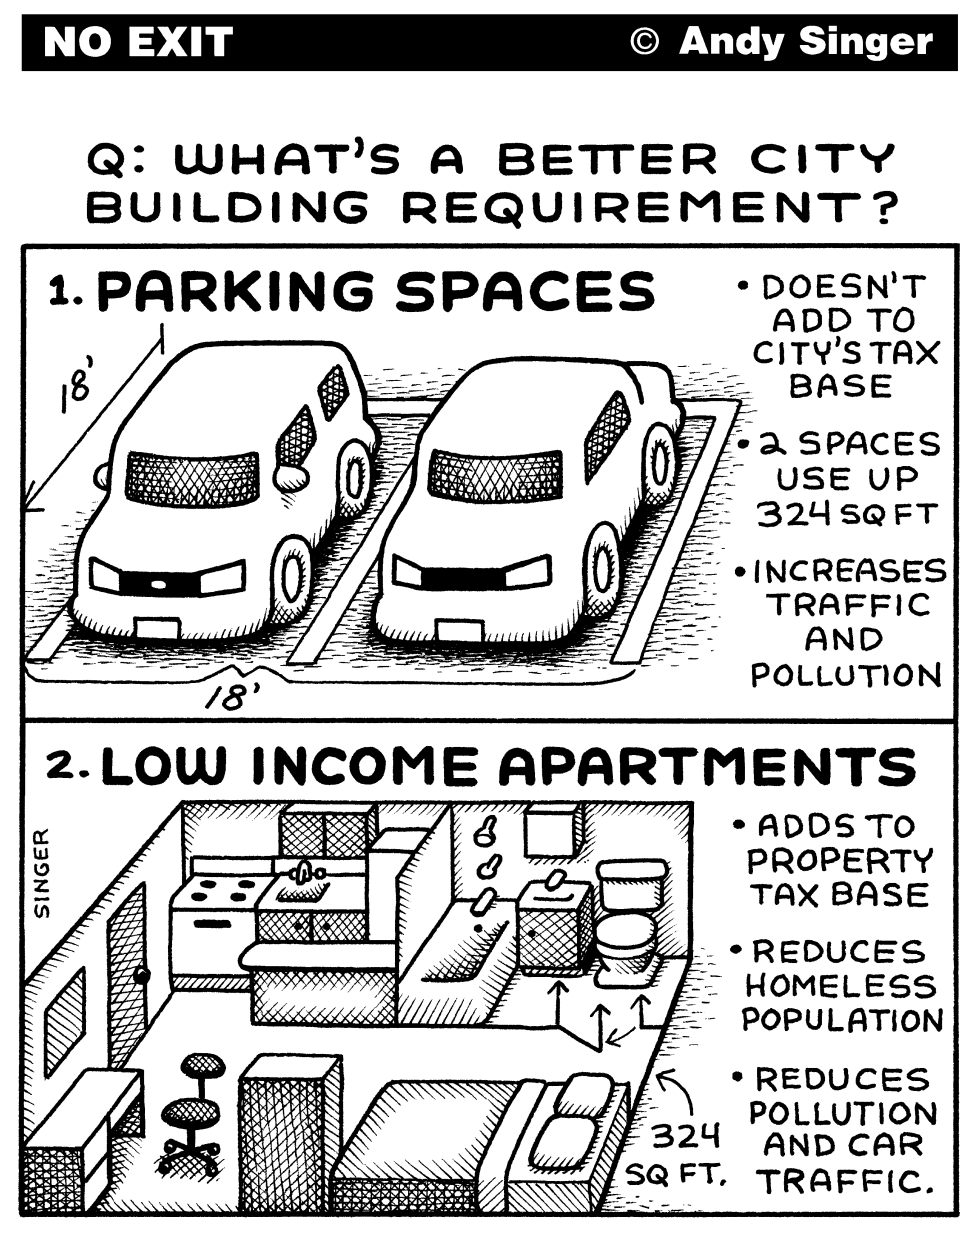 PARKING SPACES VERSUS HOUSING by Andy Singer